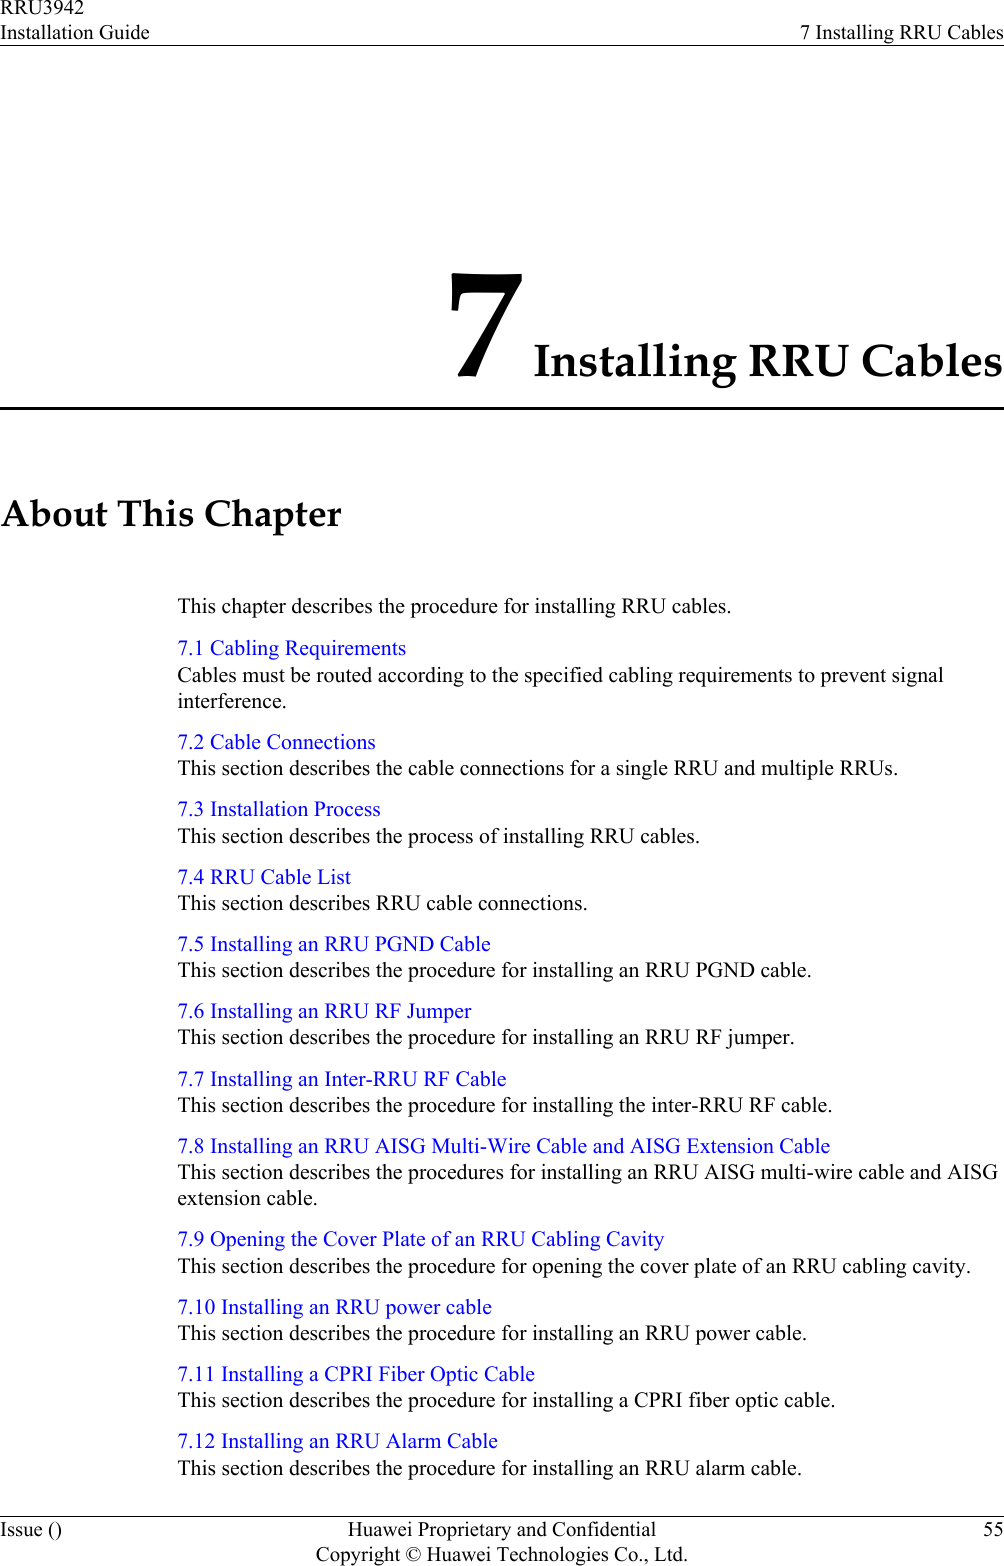 7 Installing RRU CablesAbout This ChapterThis chapter describes the procedure for installing RRU cables.7.1 Cabling RequirementsCables must be routed according to the specified cabling requirements to prevent signalinterference.7.2 Cable ConnectionsThis section describes the cable connections for a single RRU and multiple RRUs.7.3 Installation ProcessThis section describes the process of installing RRU cables.7.4 RRU Cable ListThis section describes RRU cable connections.7.5 Installing an RRU PGND CableThis section describes the procedure for installing an RRU PGND cable.7.6 Installing an RRU RF JumperThis section describes the procedure for installing an RRU RF jumper.7.7 Installing an Inter-RRU RF CableThis section describes the procedure for installing the inter-RRU RF cable.7.8 Installing an RRU AISG Multi-Wire Cable and AISG Extension CableThis section describes the procedures for installing an RRU AISG multi-wire cable and AISGextension cable.7.9 Opening the Cover Plate of an RRU Cabling CavityThis section describes the procedure for opening the cover plate of an RRU cabling cavity.7.10 Installing an RRU power cableThis section describes the procedure for installing an RRU power cable.7.11 Installing a CPRI Fiber Optic CableThis section describes the procedure for installing a CPRI fiber optic cable.7.12 Installing an RRU Alarm CableThis section describes the procedure for installing an RRU alarm cable.RRU3942Installation Guide 7 Installing RRU CablesIssue () Huawei Proprietary and ConfidentialCopyright © Huawei Technologies Co., Ltd.55